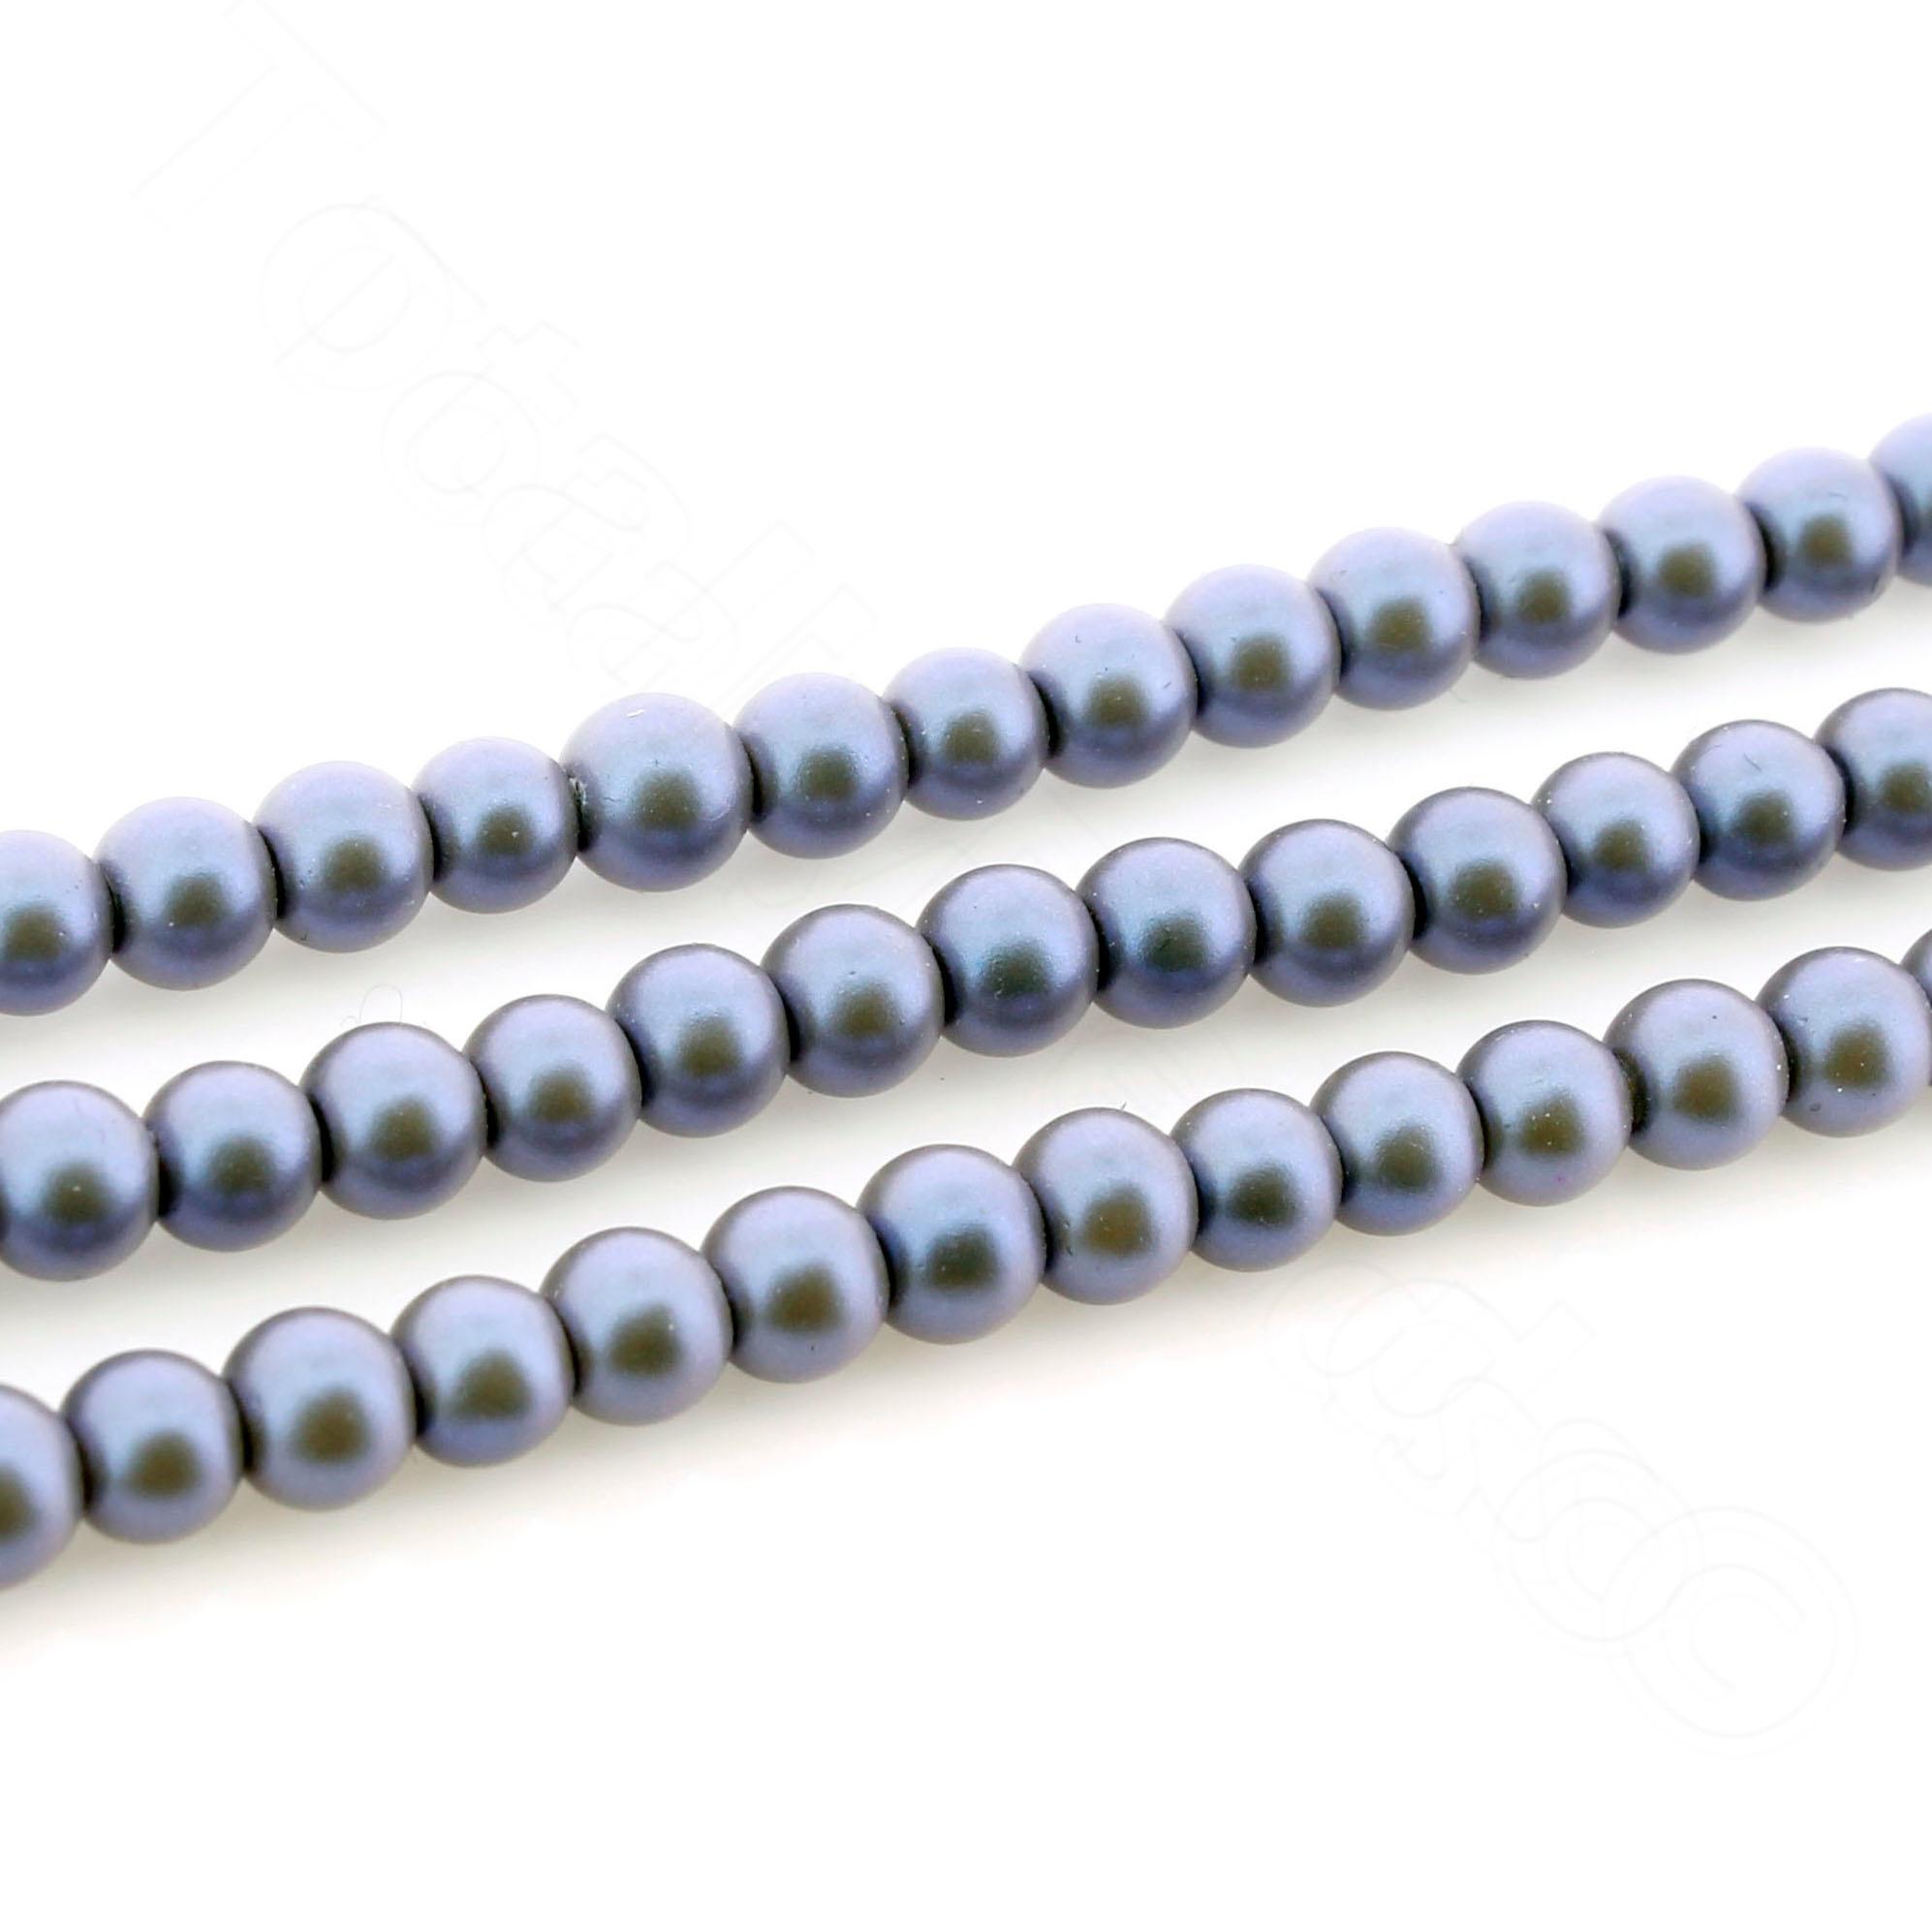 Satin Glass Pearl Round Beads 5mm - Light  Violet